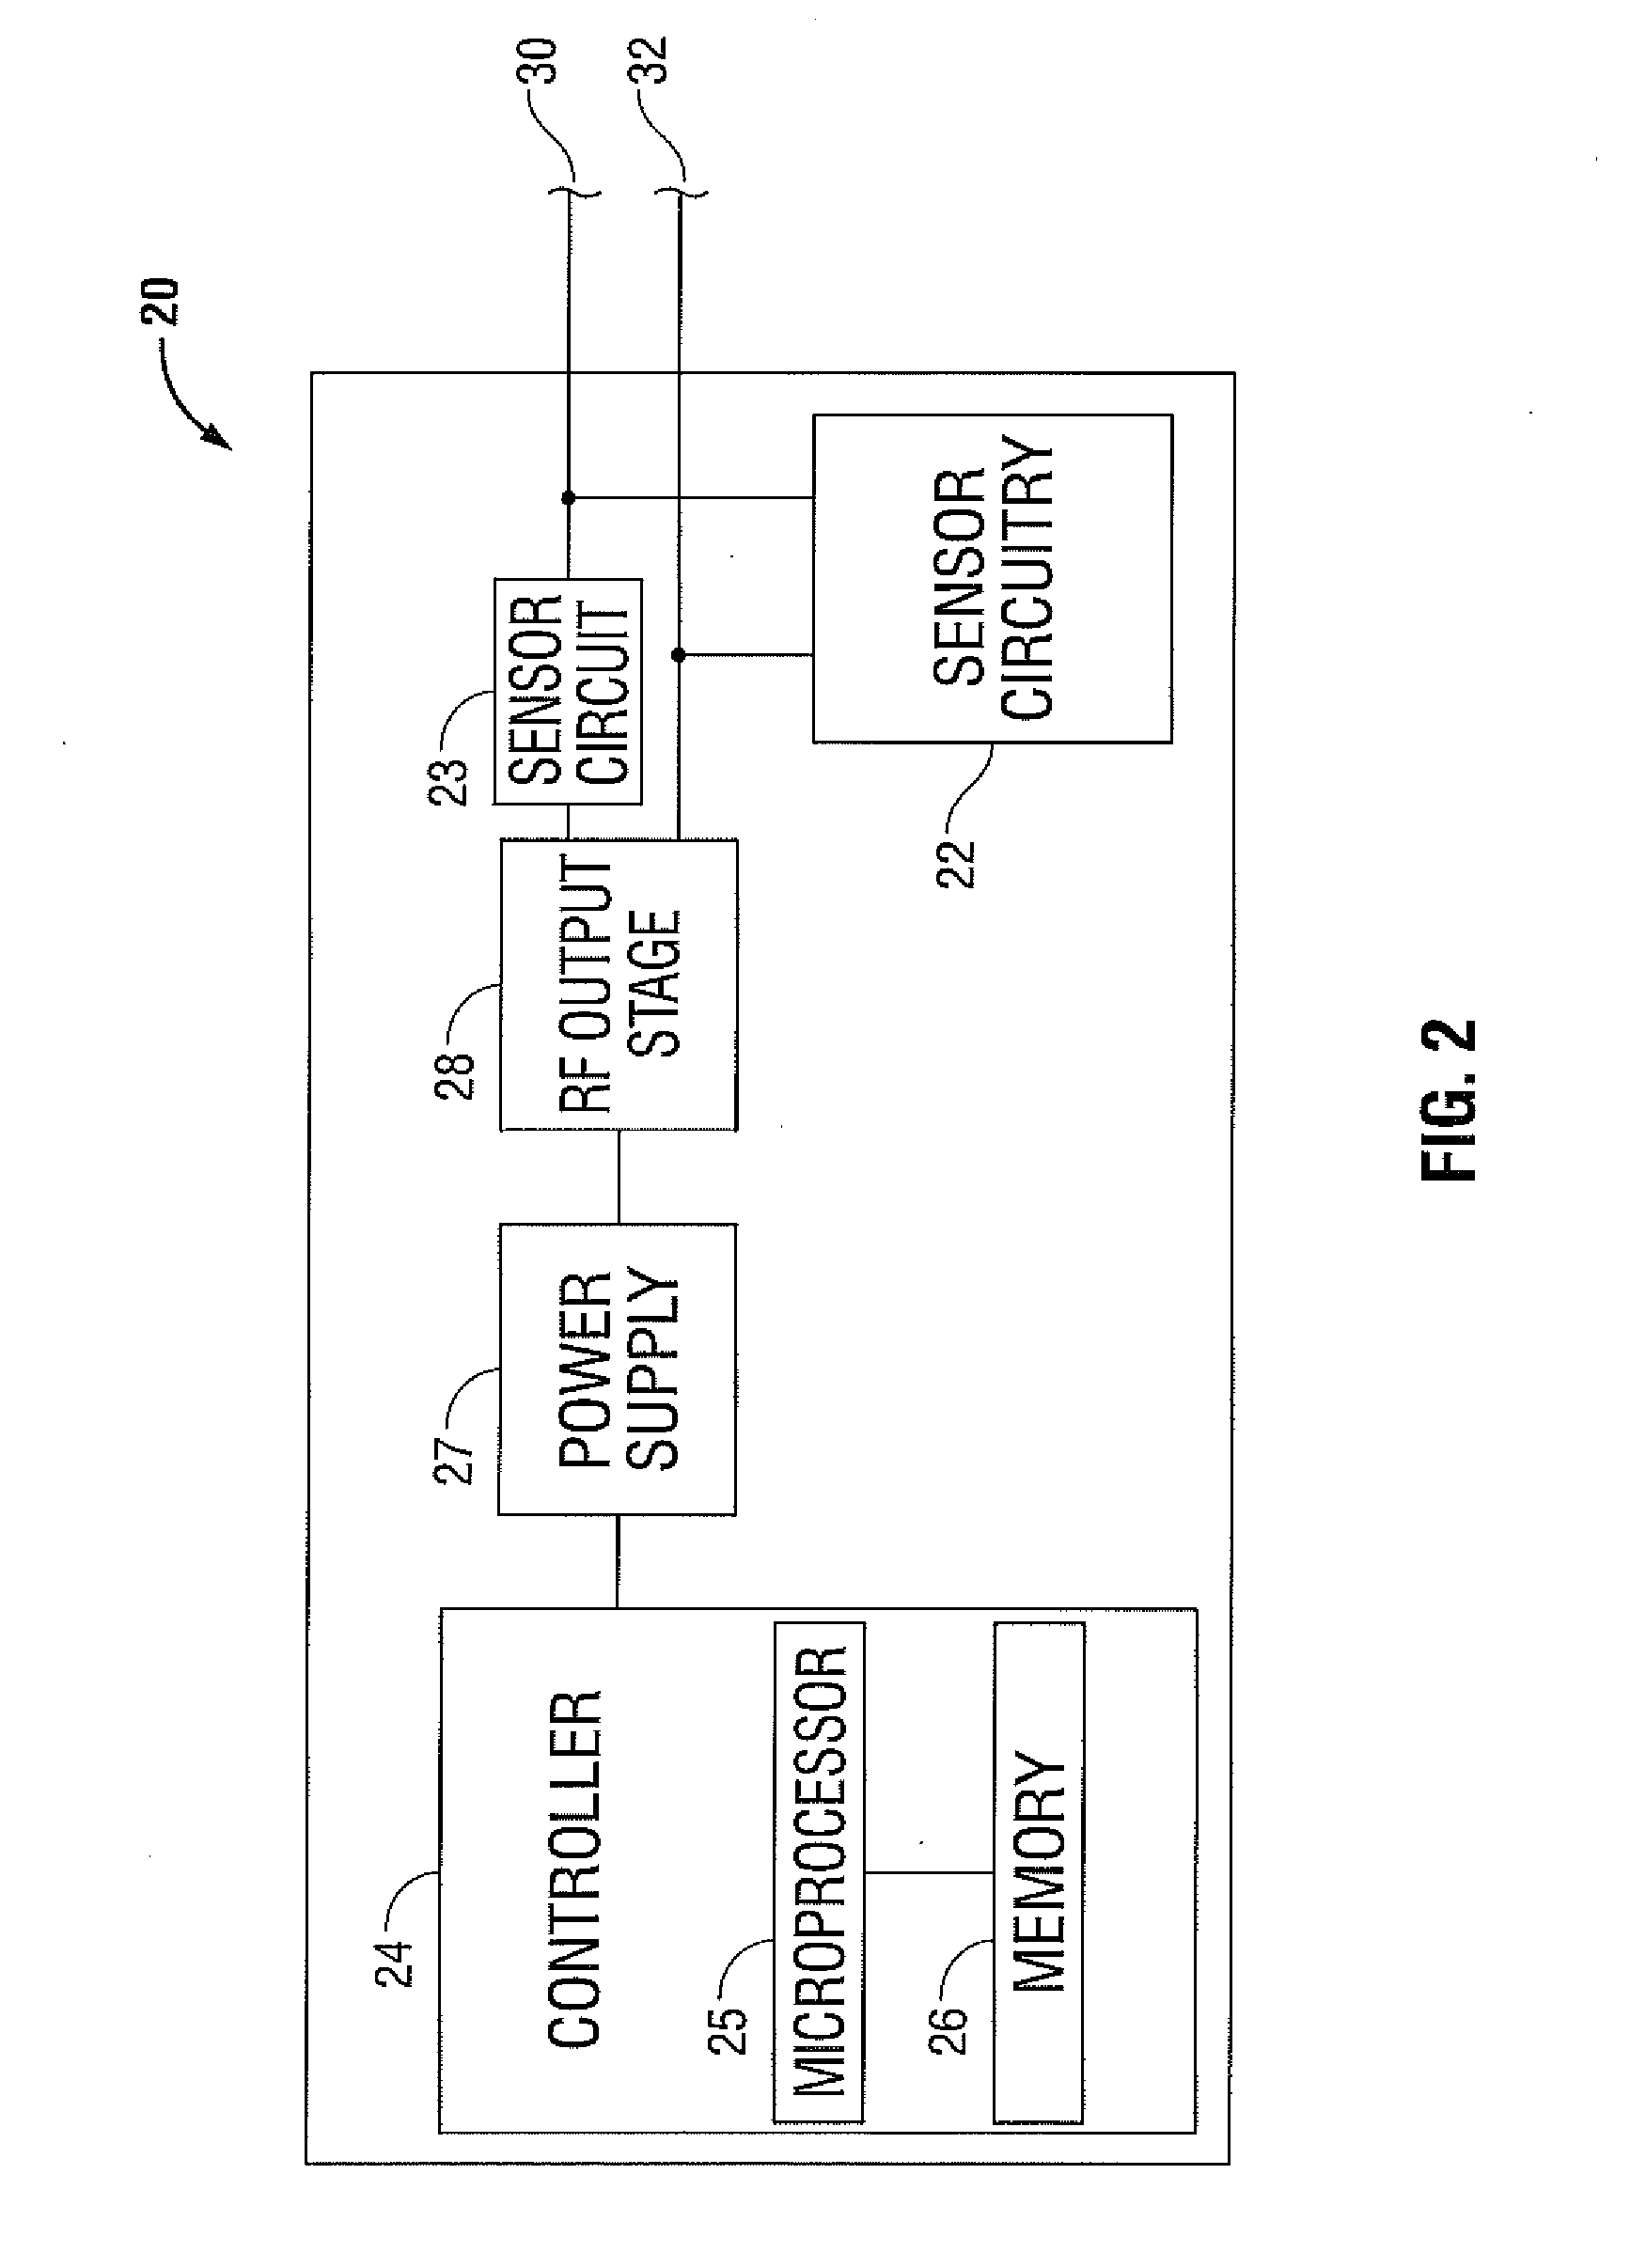 System and Method for Controlling Electrosurgical Output